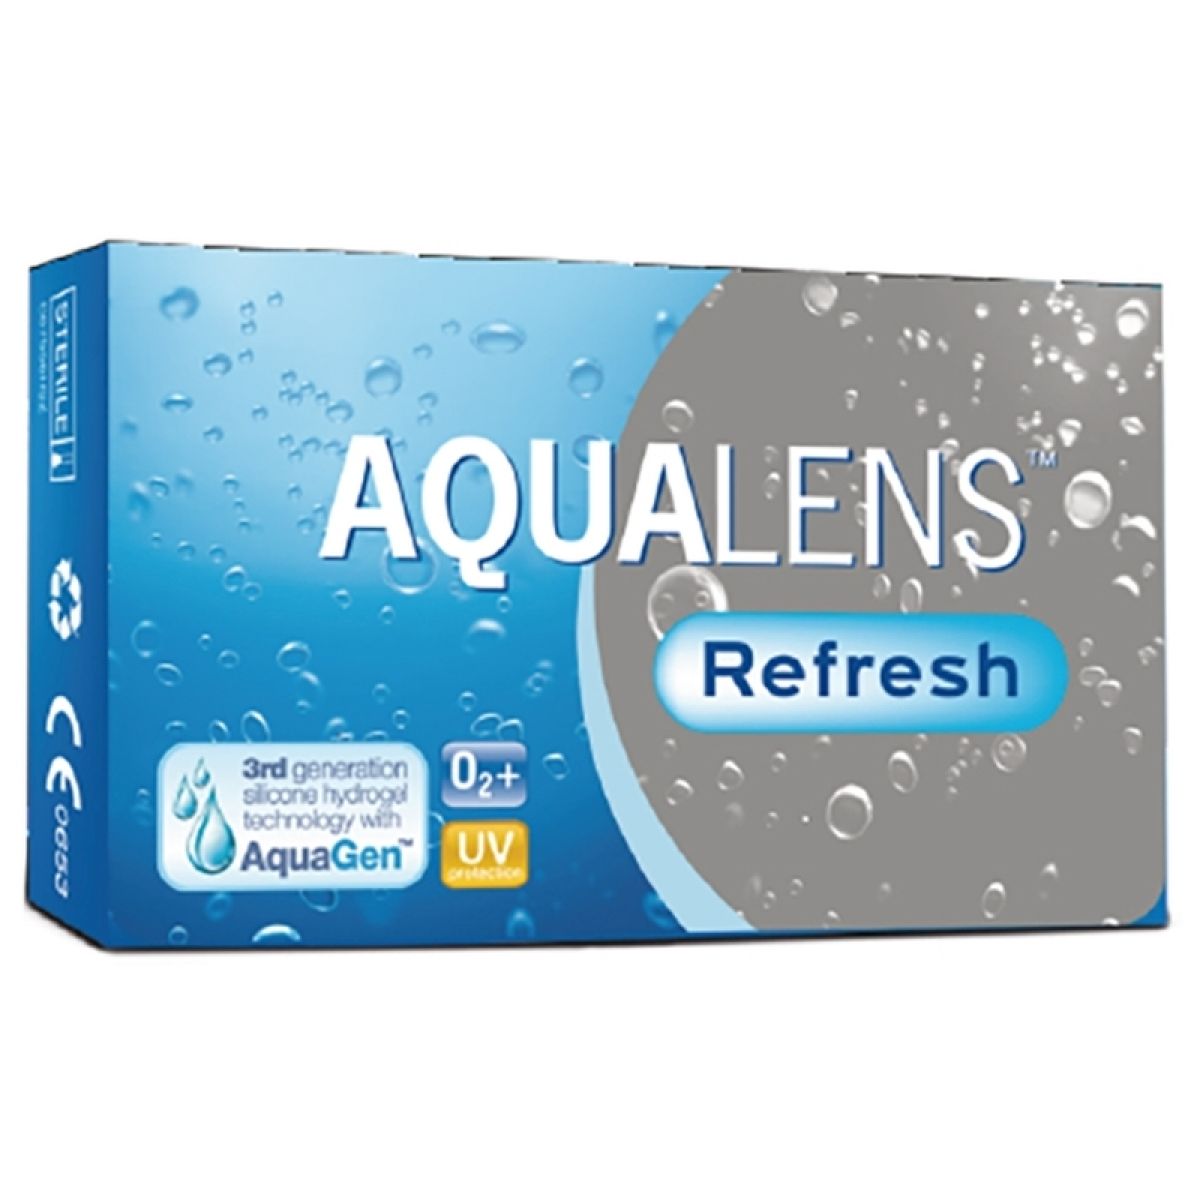 AQUALENS REFRESH MONTHLY DISPOSABLE CONTACT LENSES (3 LENSES)